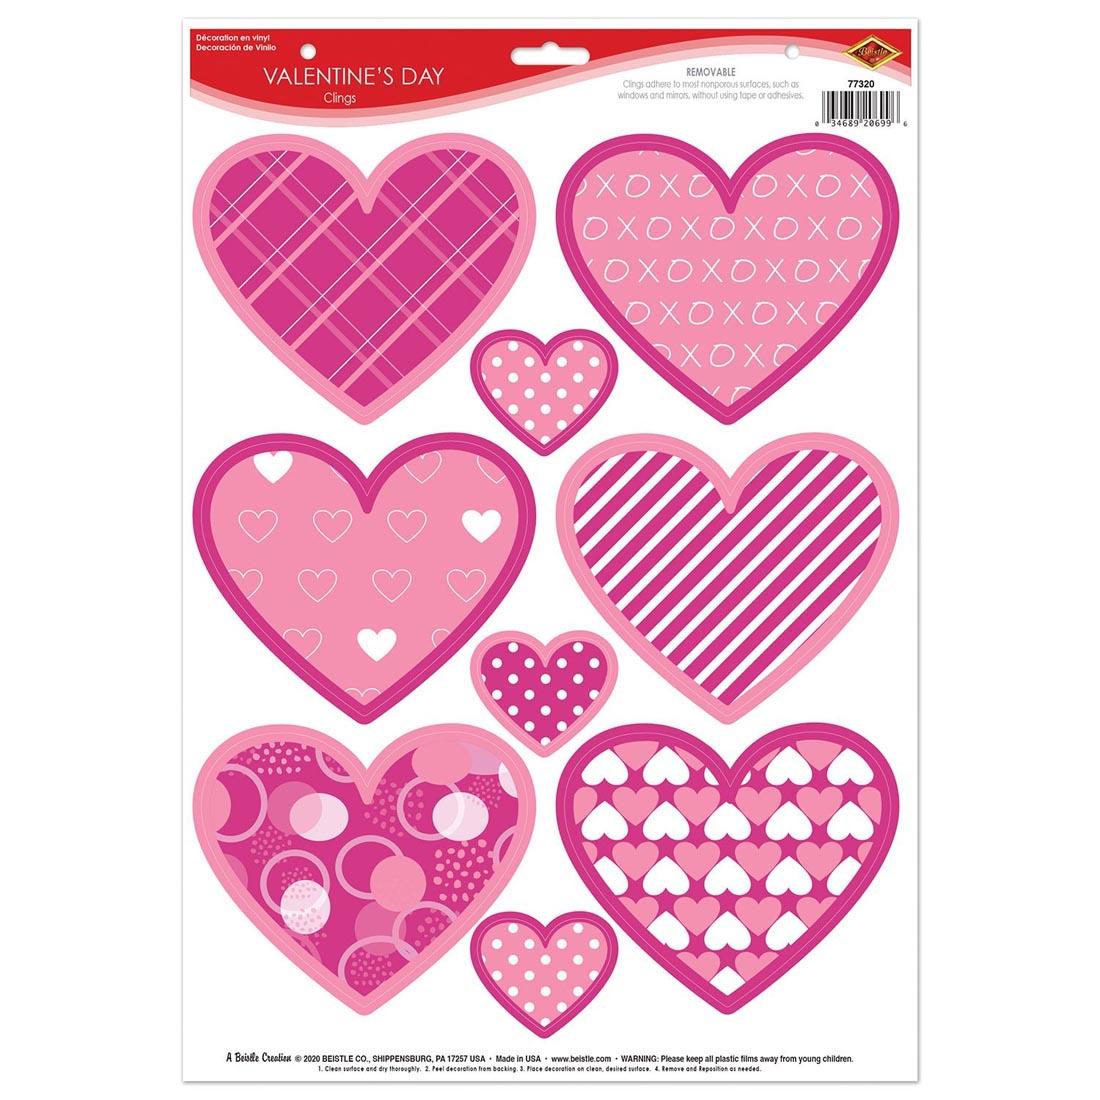 Removeable heart-shaped window clings in assorted colors and sizes